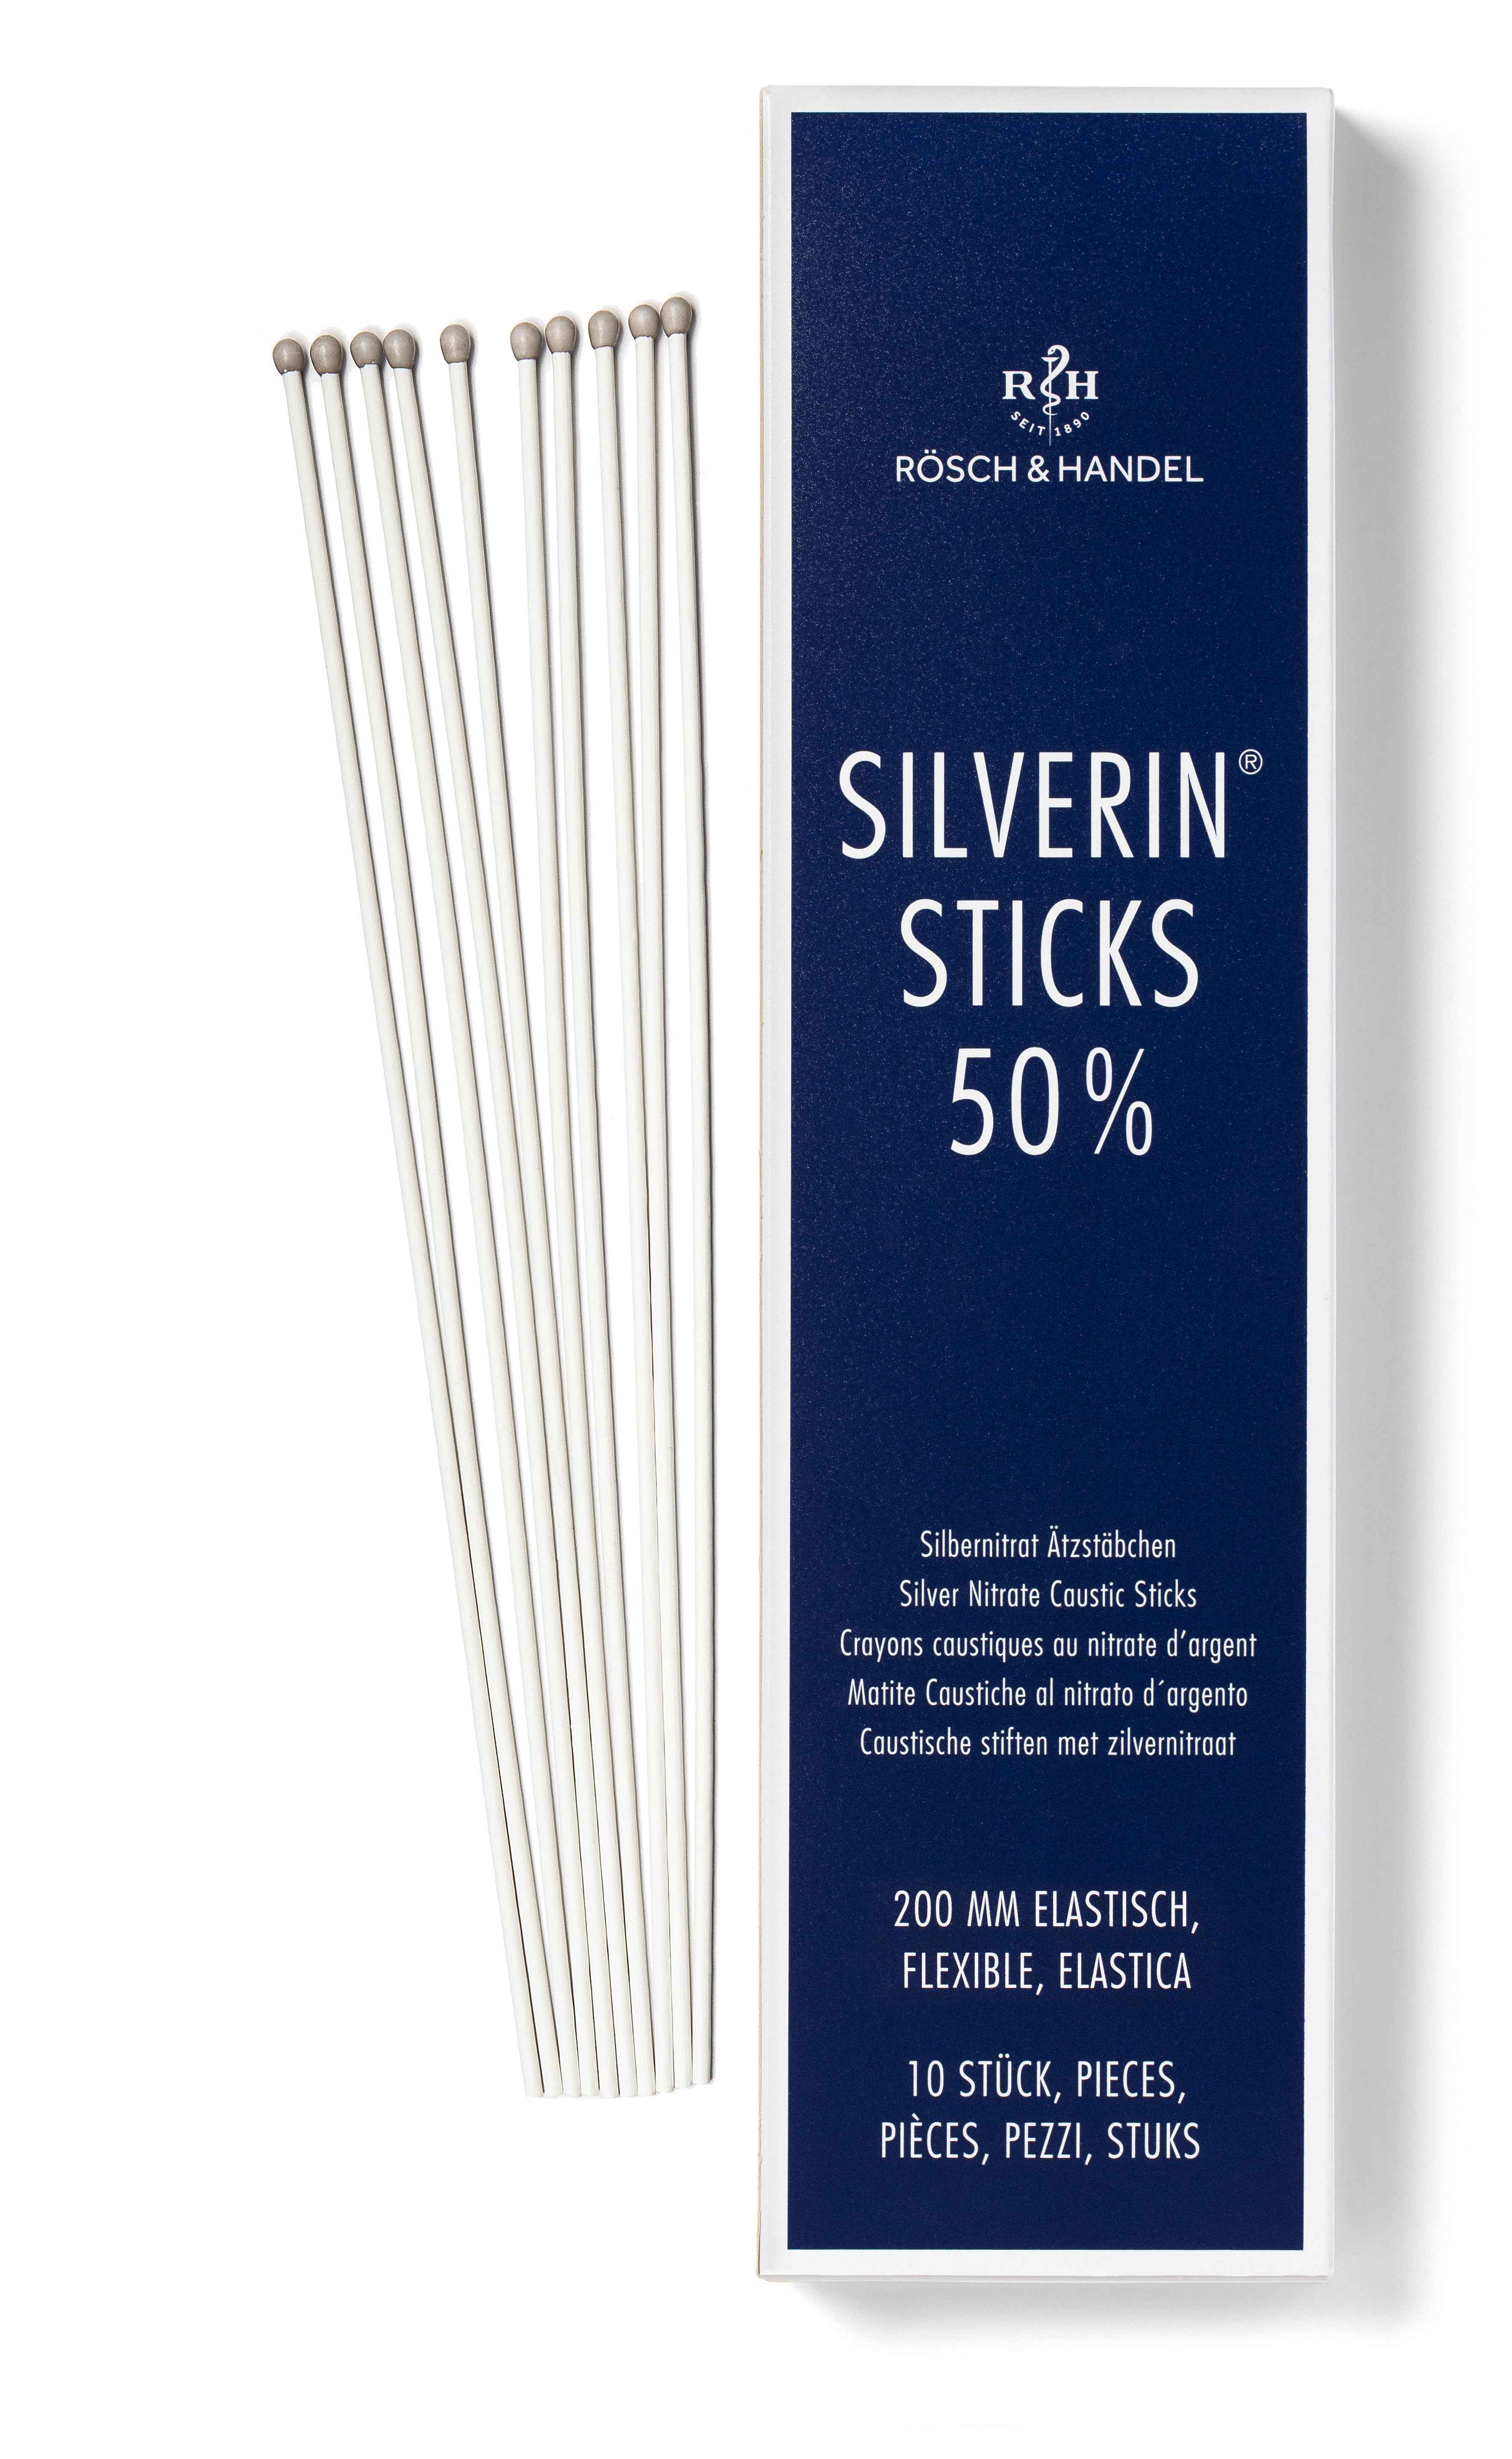 SILVERIN STICKS 50% with silver nitrate